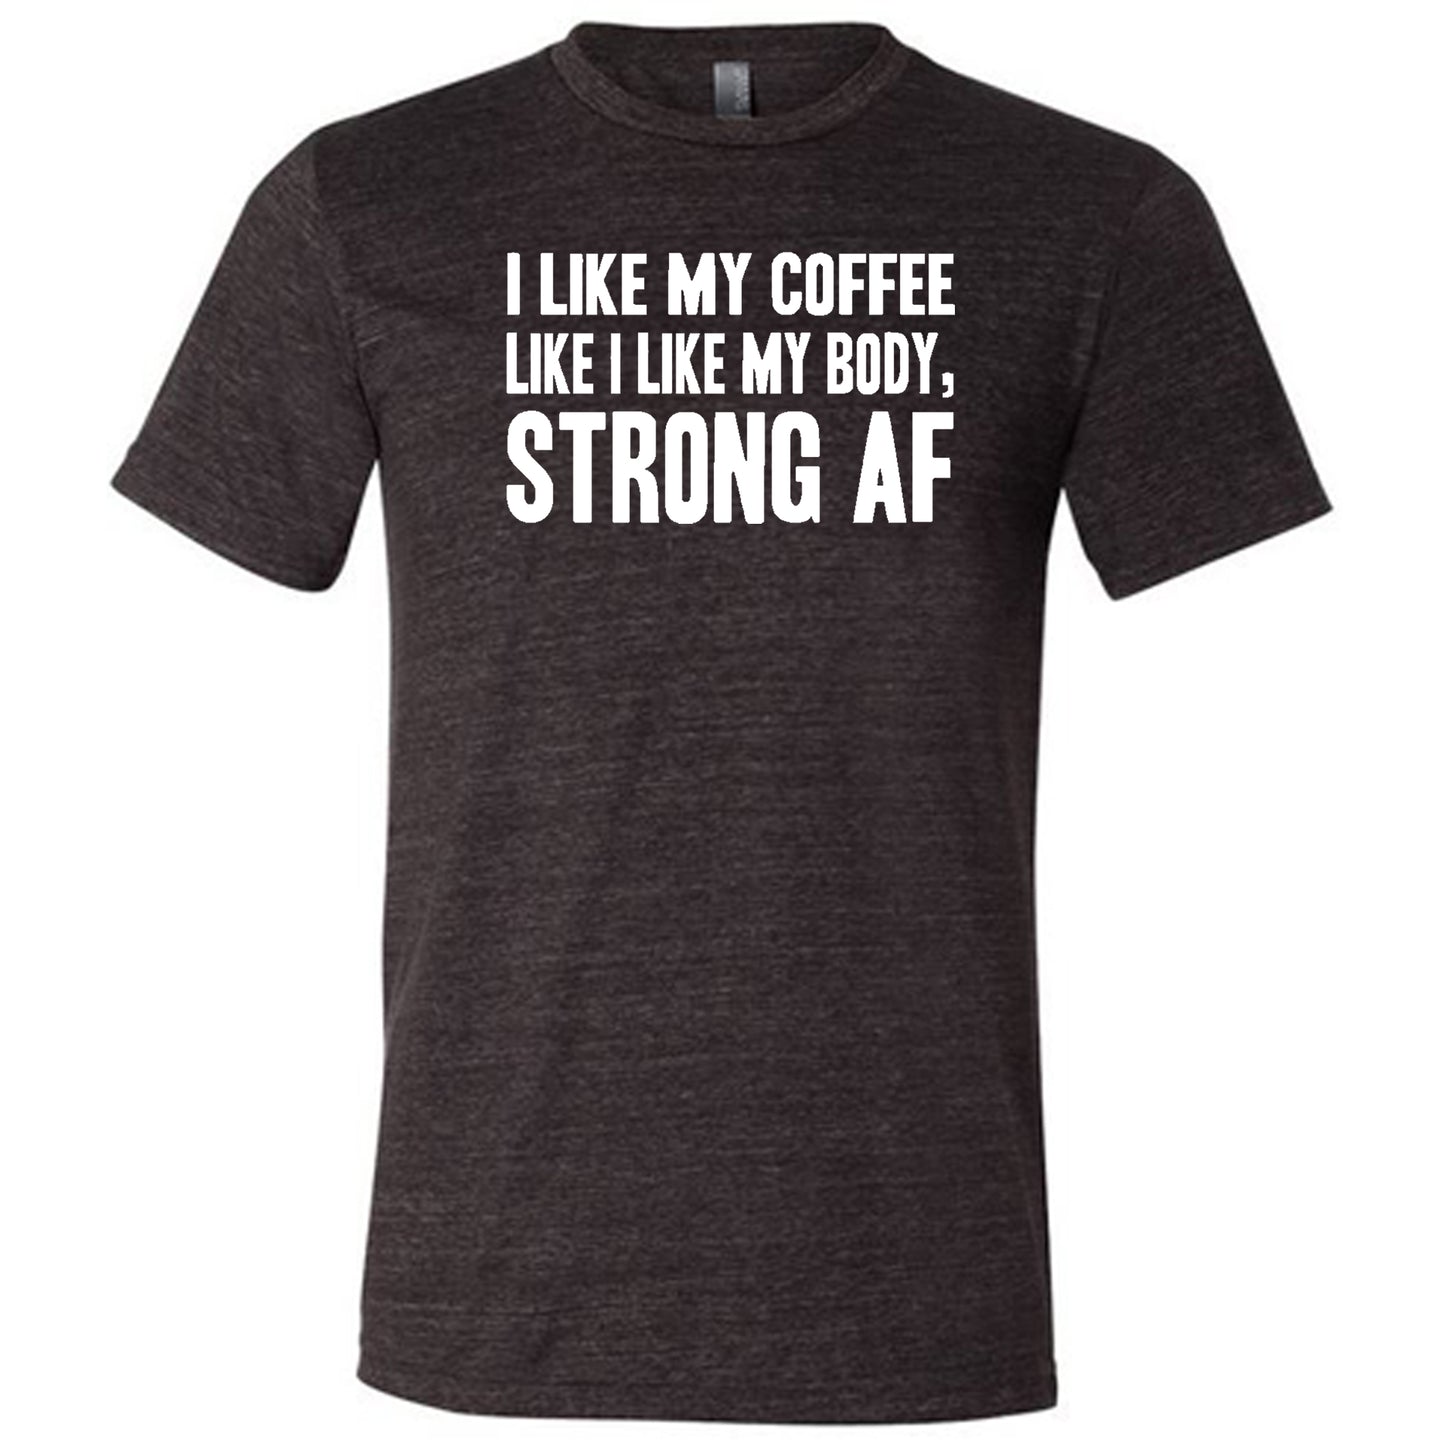 "I Like My Coffee Like I Like My Body Strong AF" quote in white lettering on black unisex tee